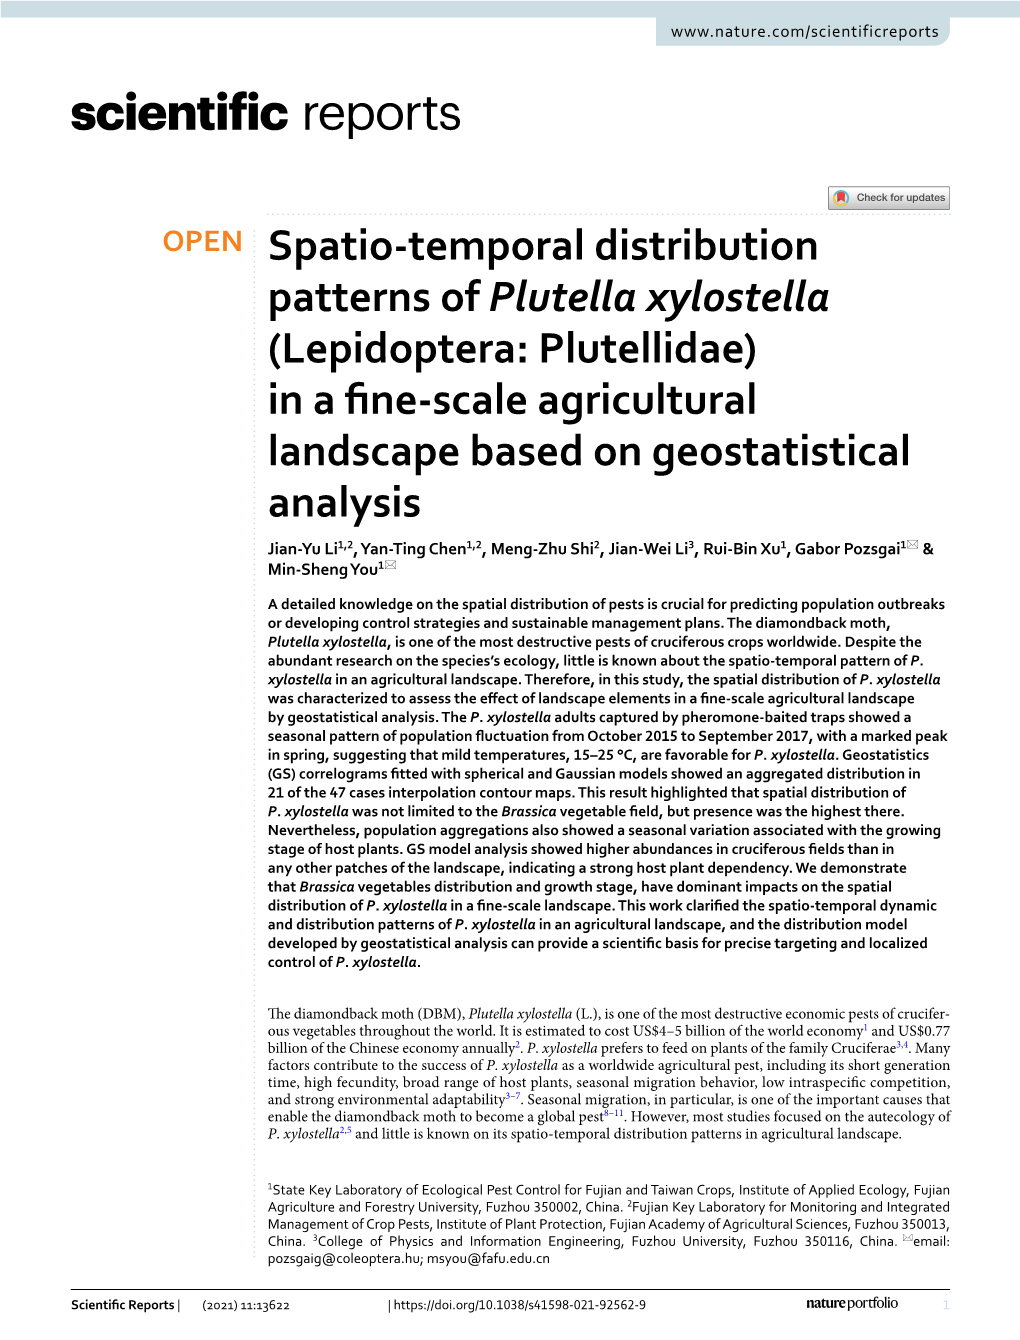 Spatio-Temporal Distribution Patterns of Plutella Xylostella (Lepidoptera